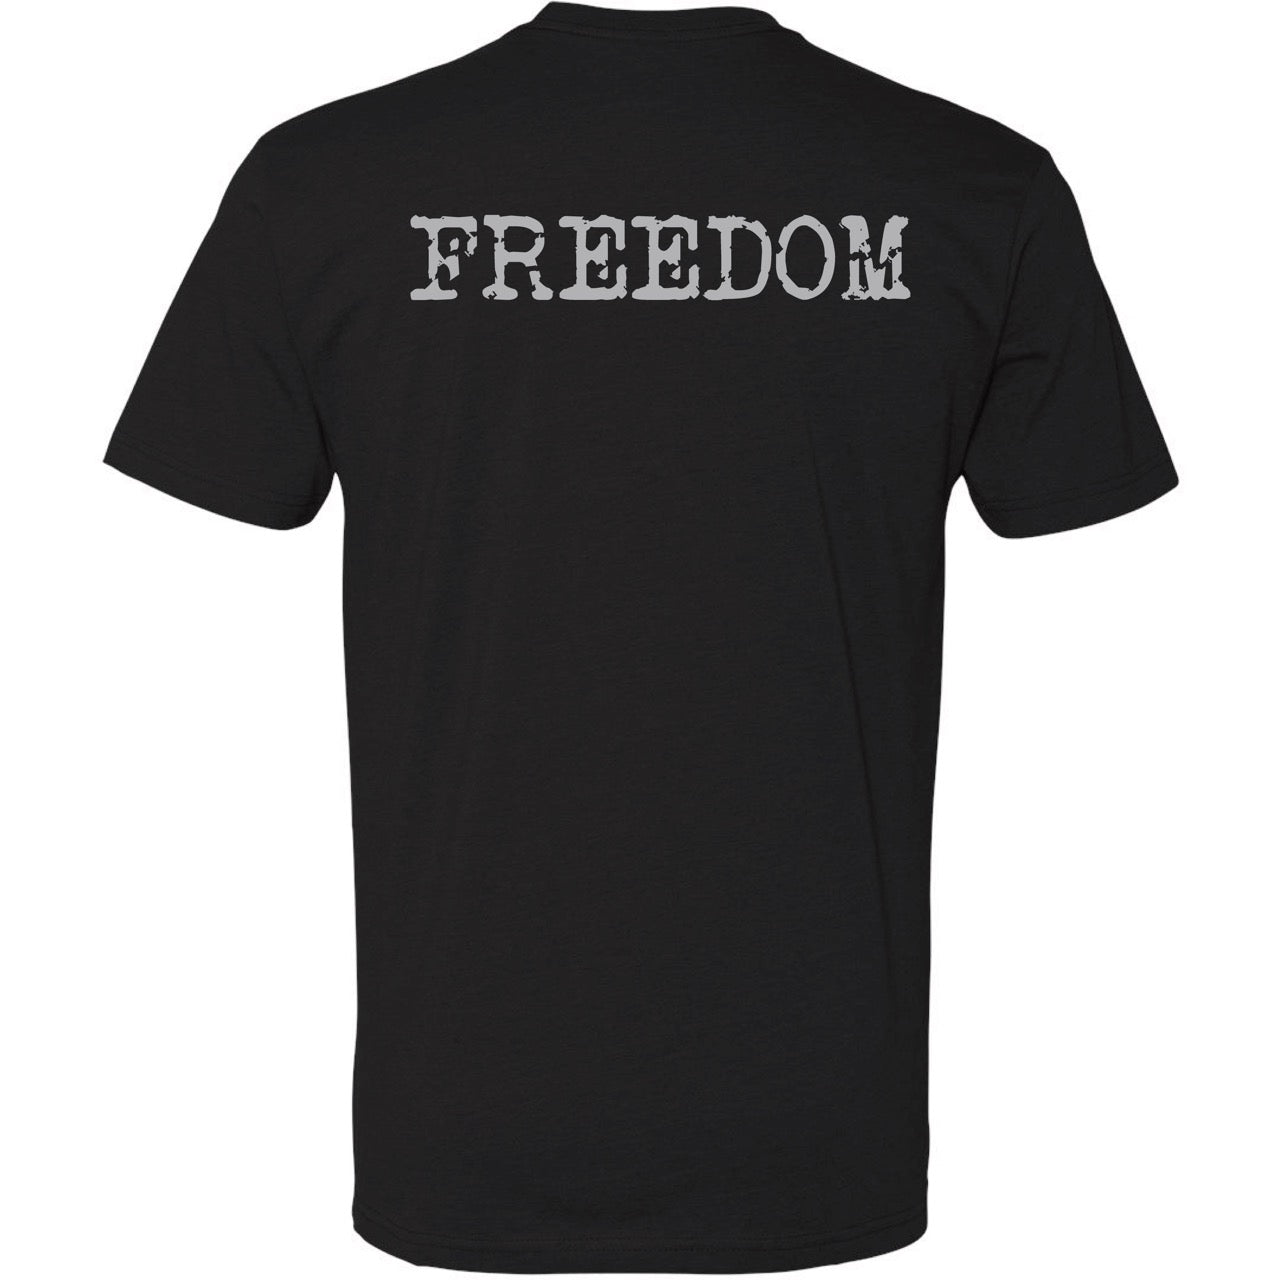 FREEDOM Tee | We Defy The Norm